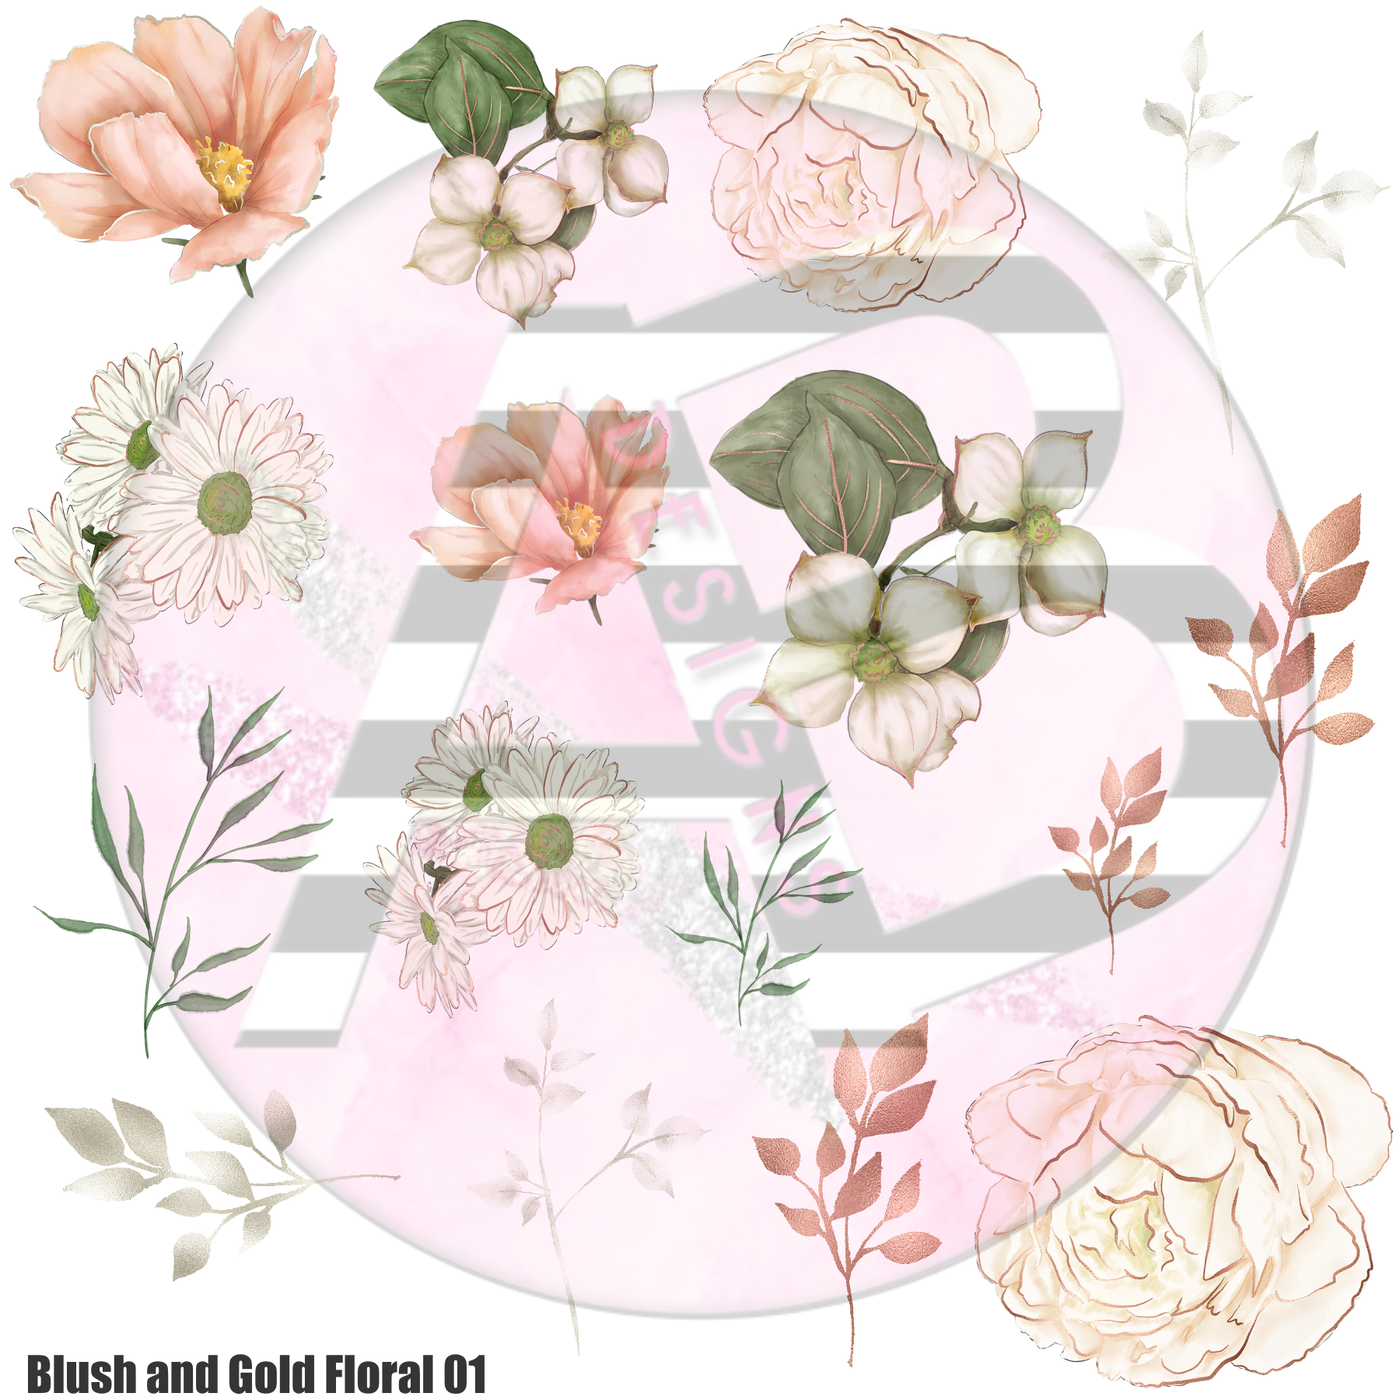 Blush and Gold Floral 01 Full Sheet 12x12 - Clear Sheet